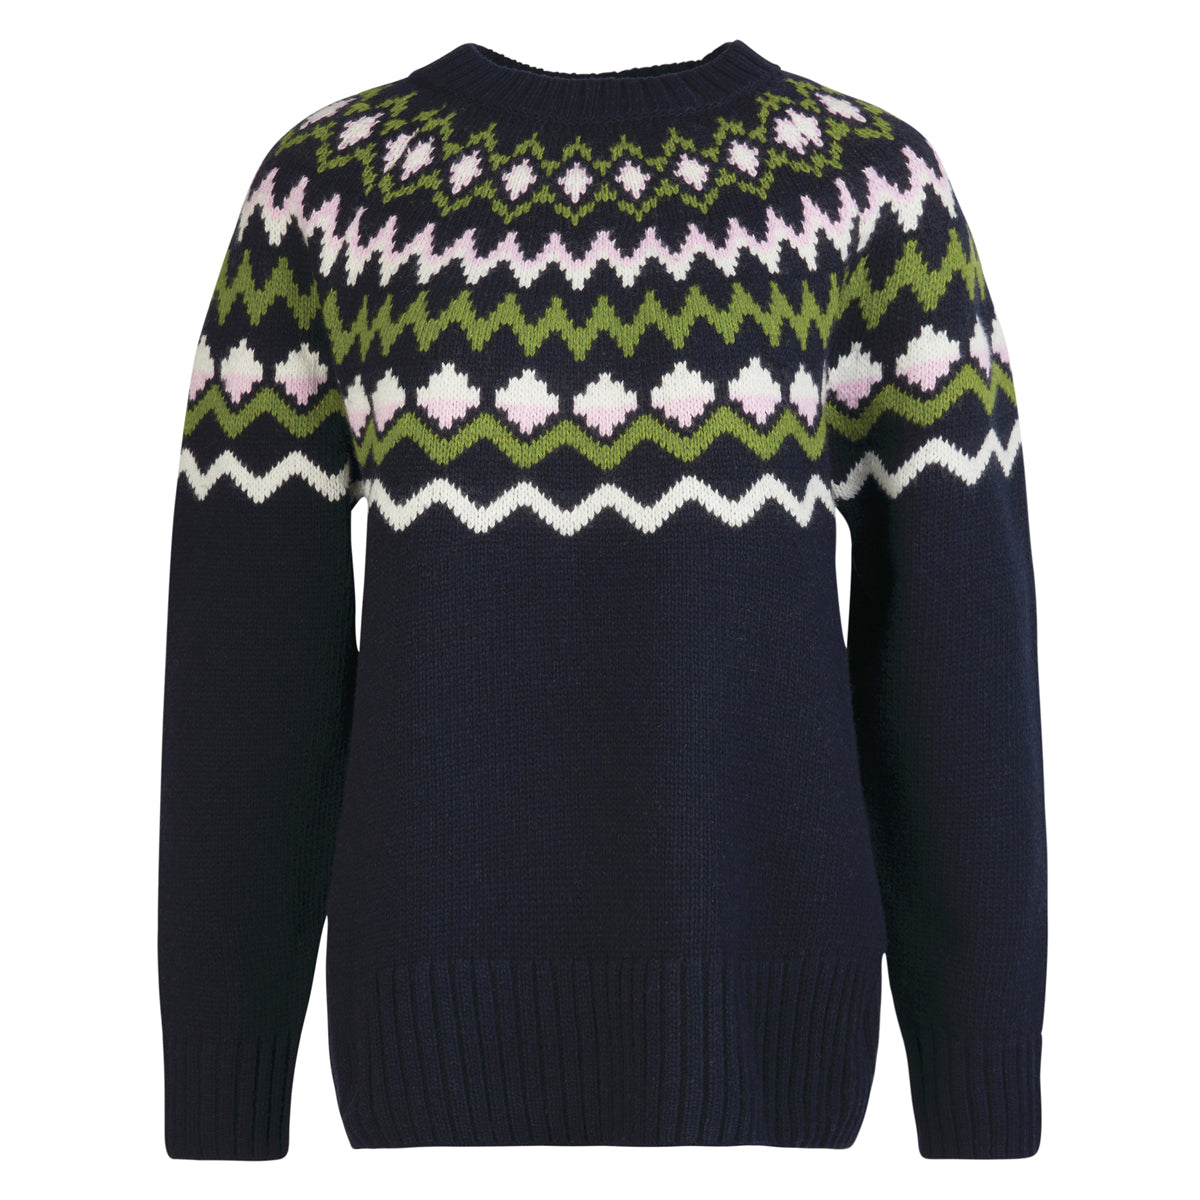 Barbour Women's Chesil Knit Sweater